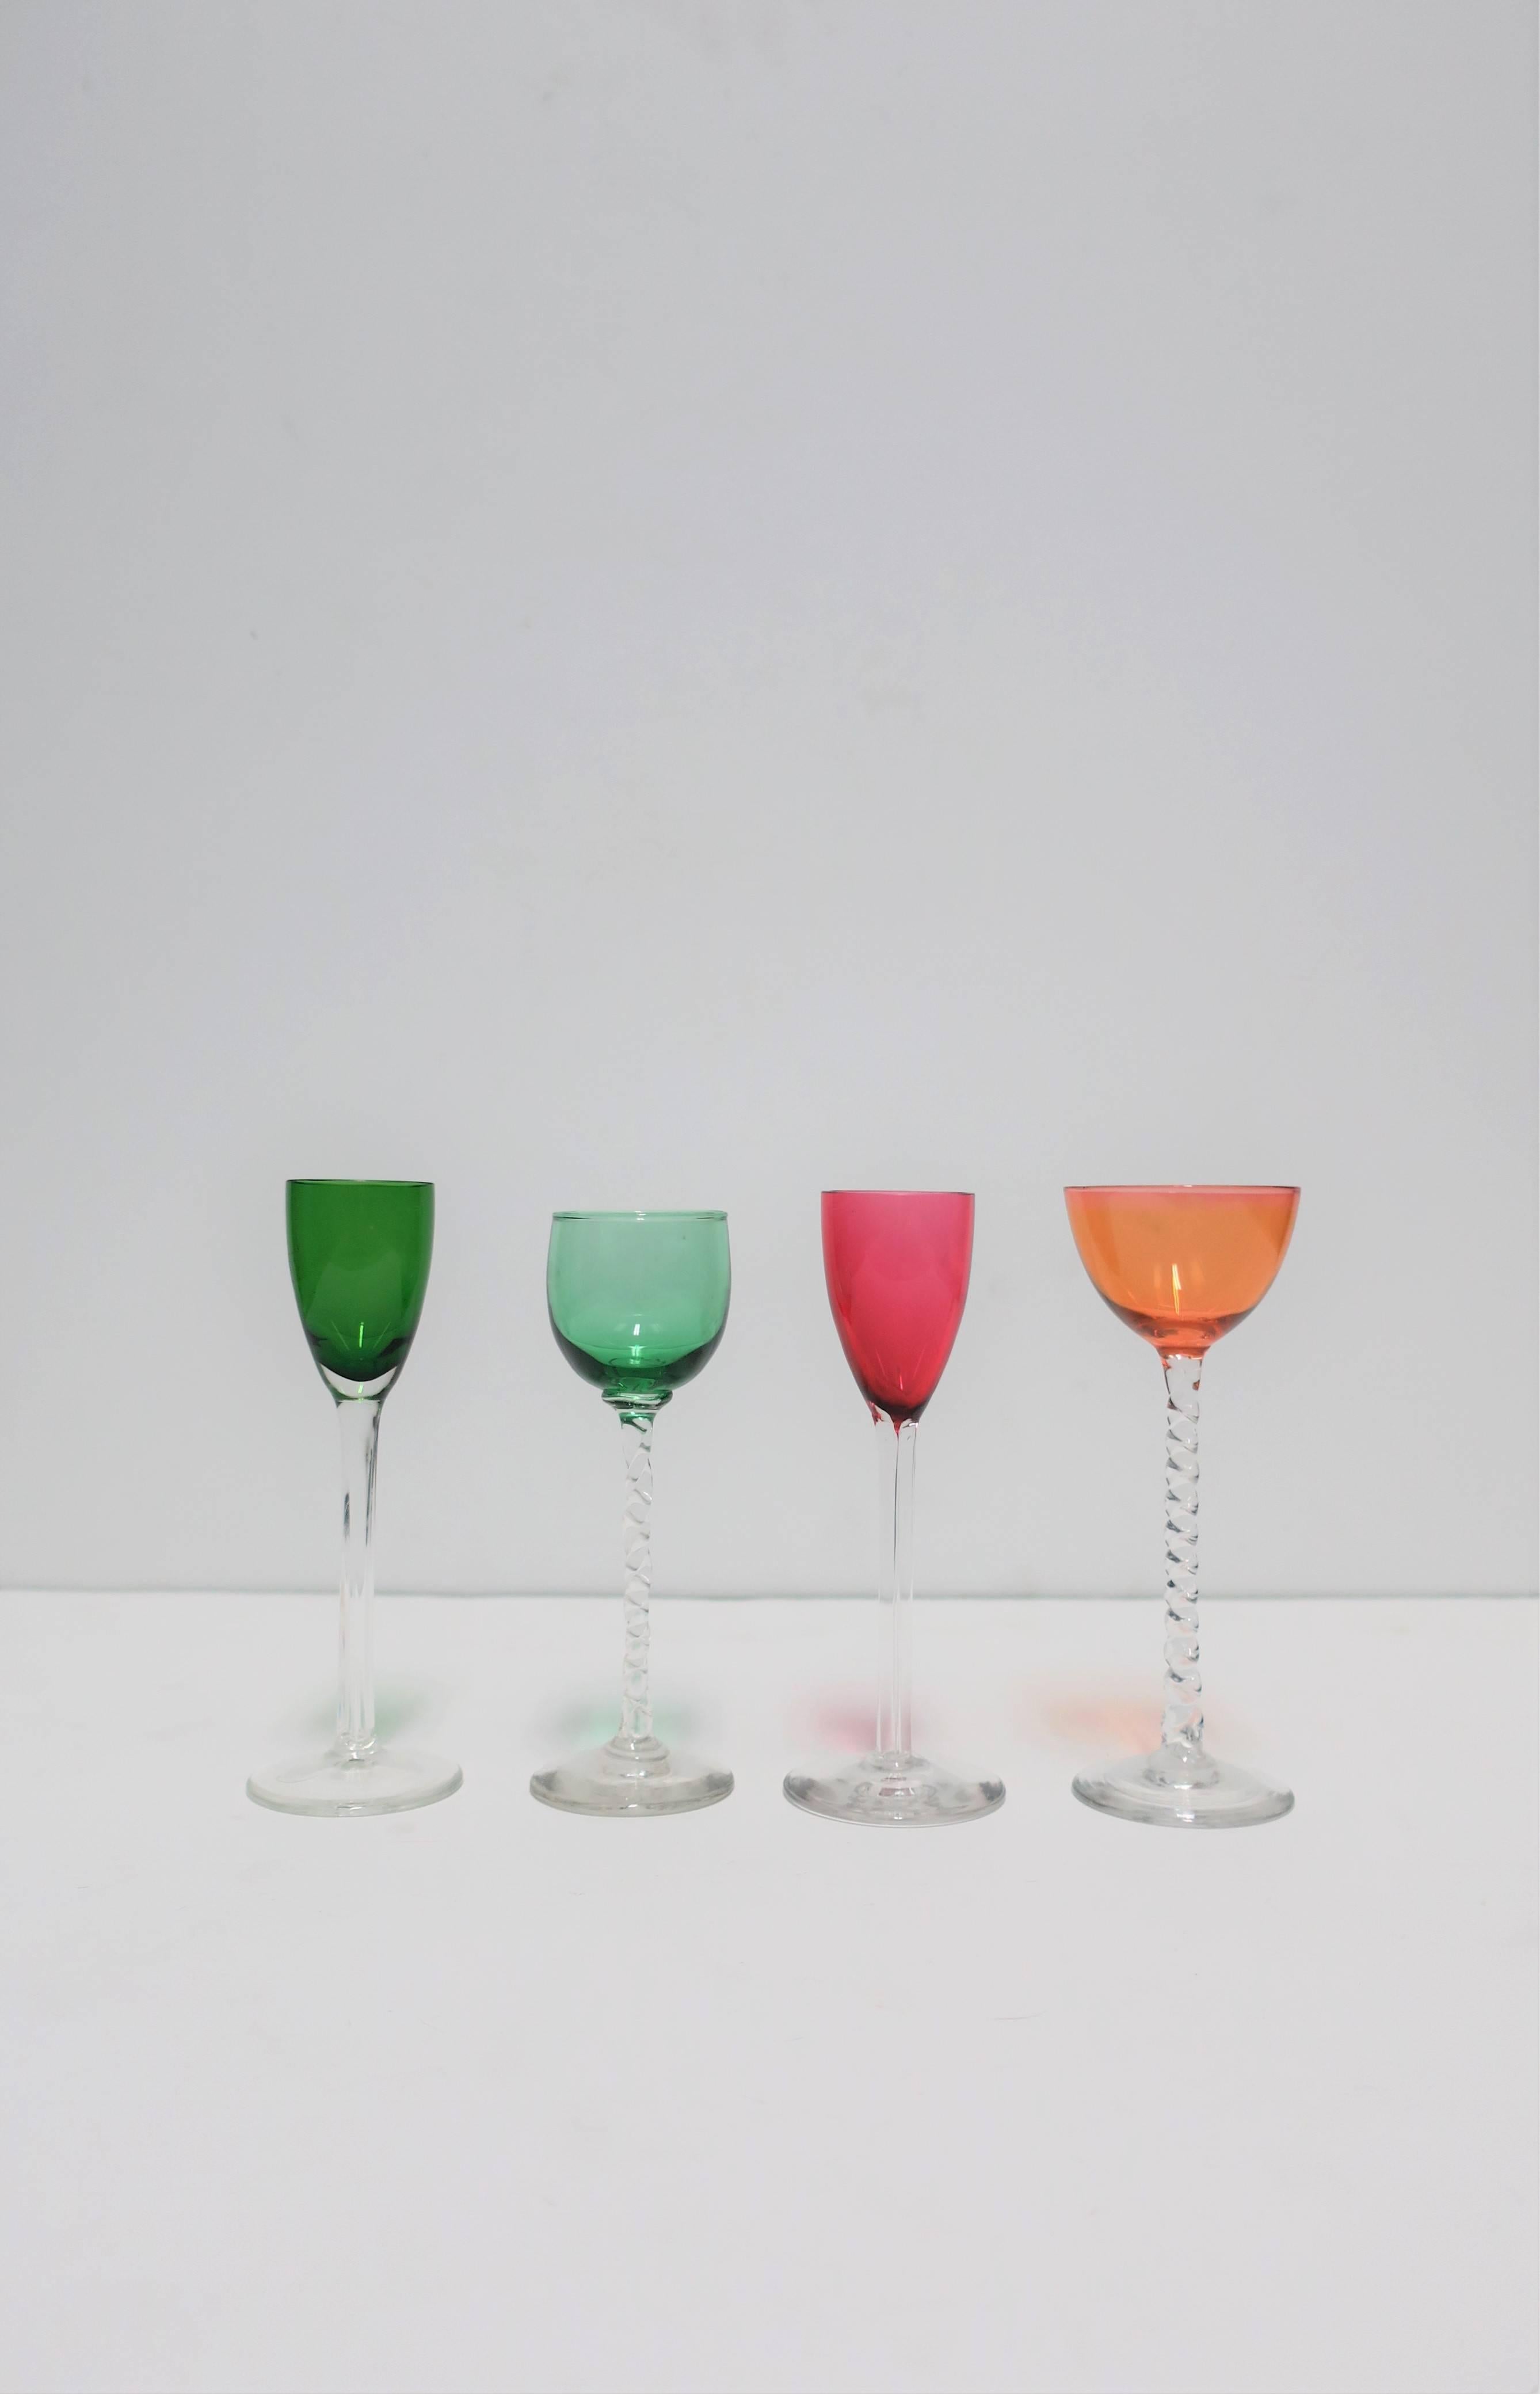 A beautiful set of 4 colorful art glass blown-glass cordial, aperitif liquor or spirits glasses. Colors include: dark green, light green, red/dark pink, and light orange. A great addition to any bar, bar cart, or entertainment area, etc. Tallest is